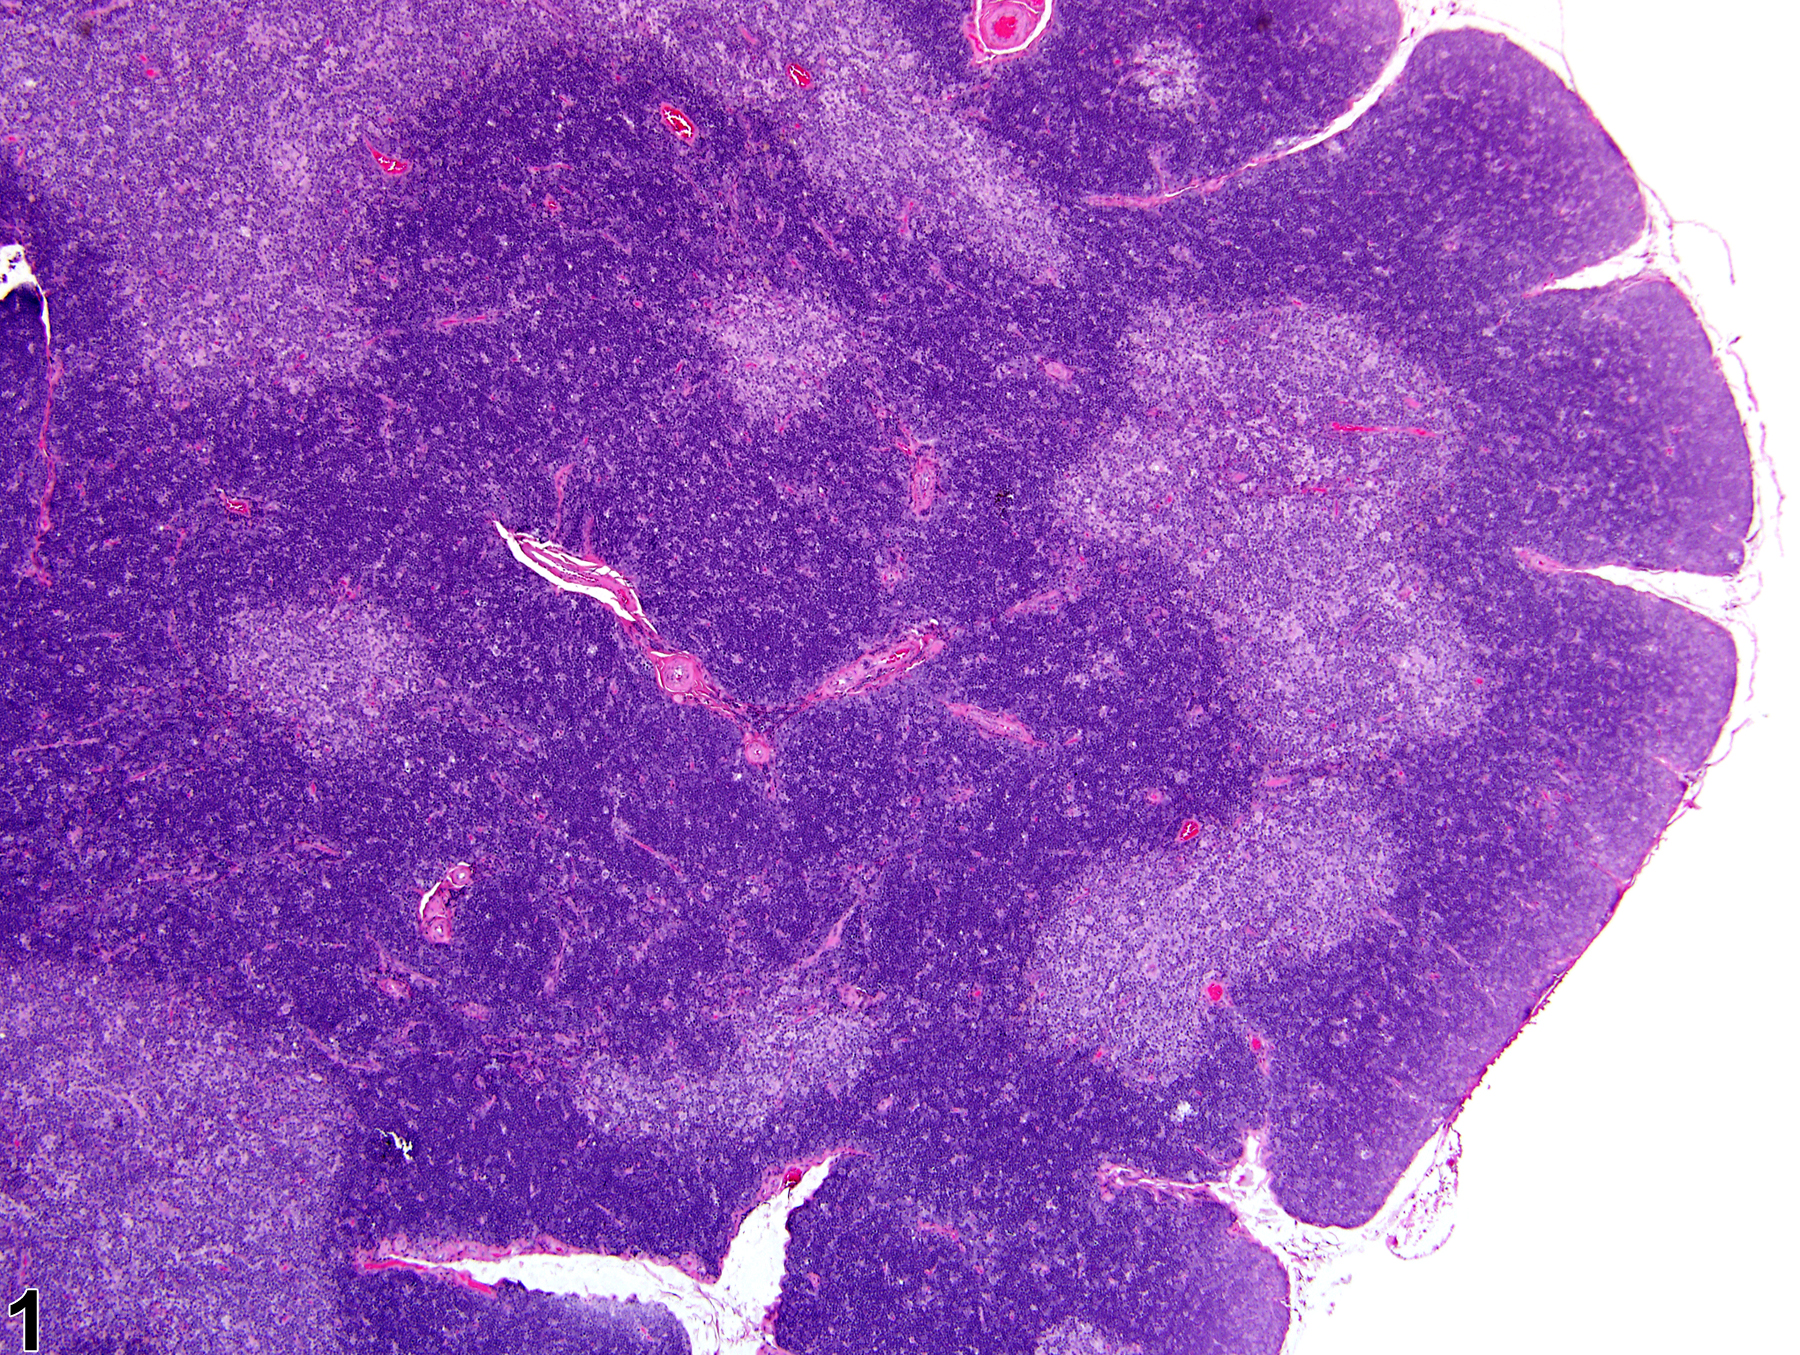 Image of atrophy in the thymus from a male Harlan Sprague-Dawley rat in a subchronic study